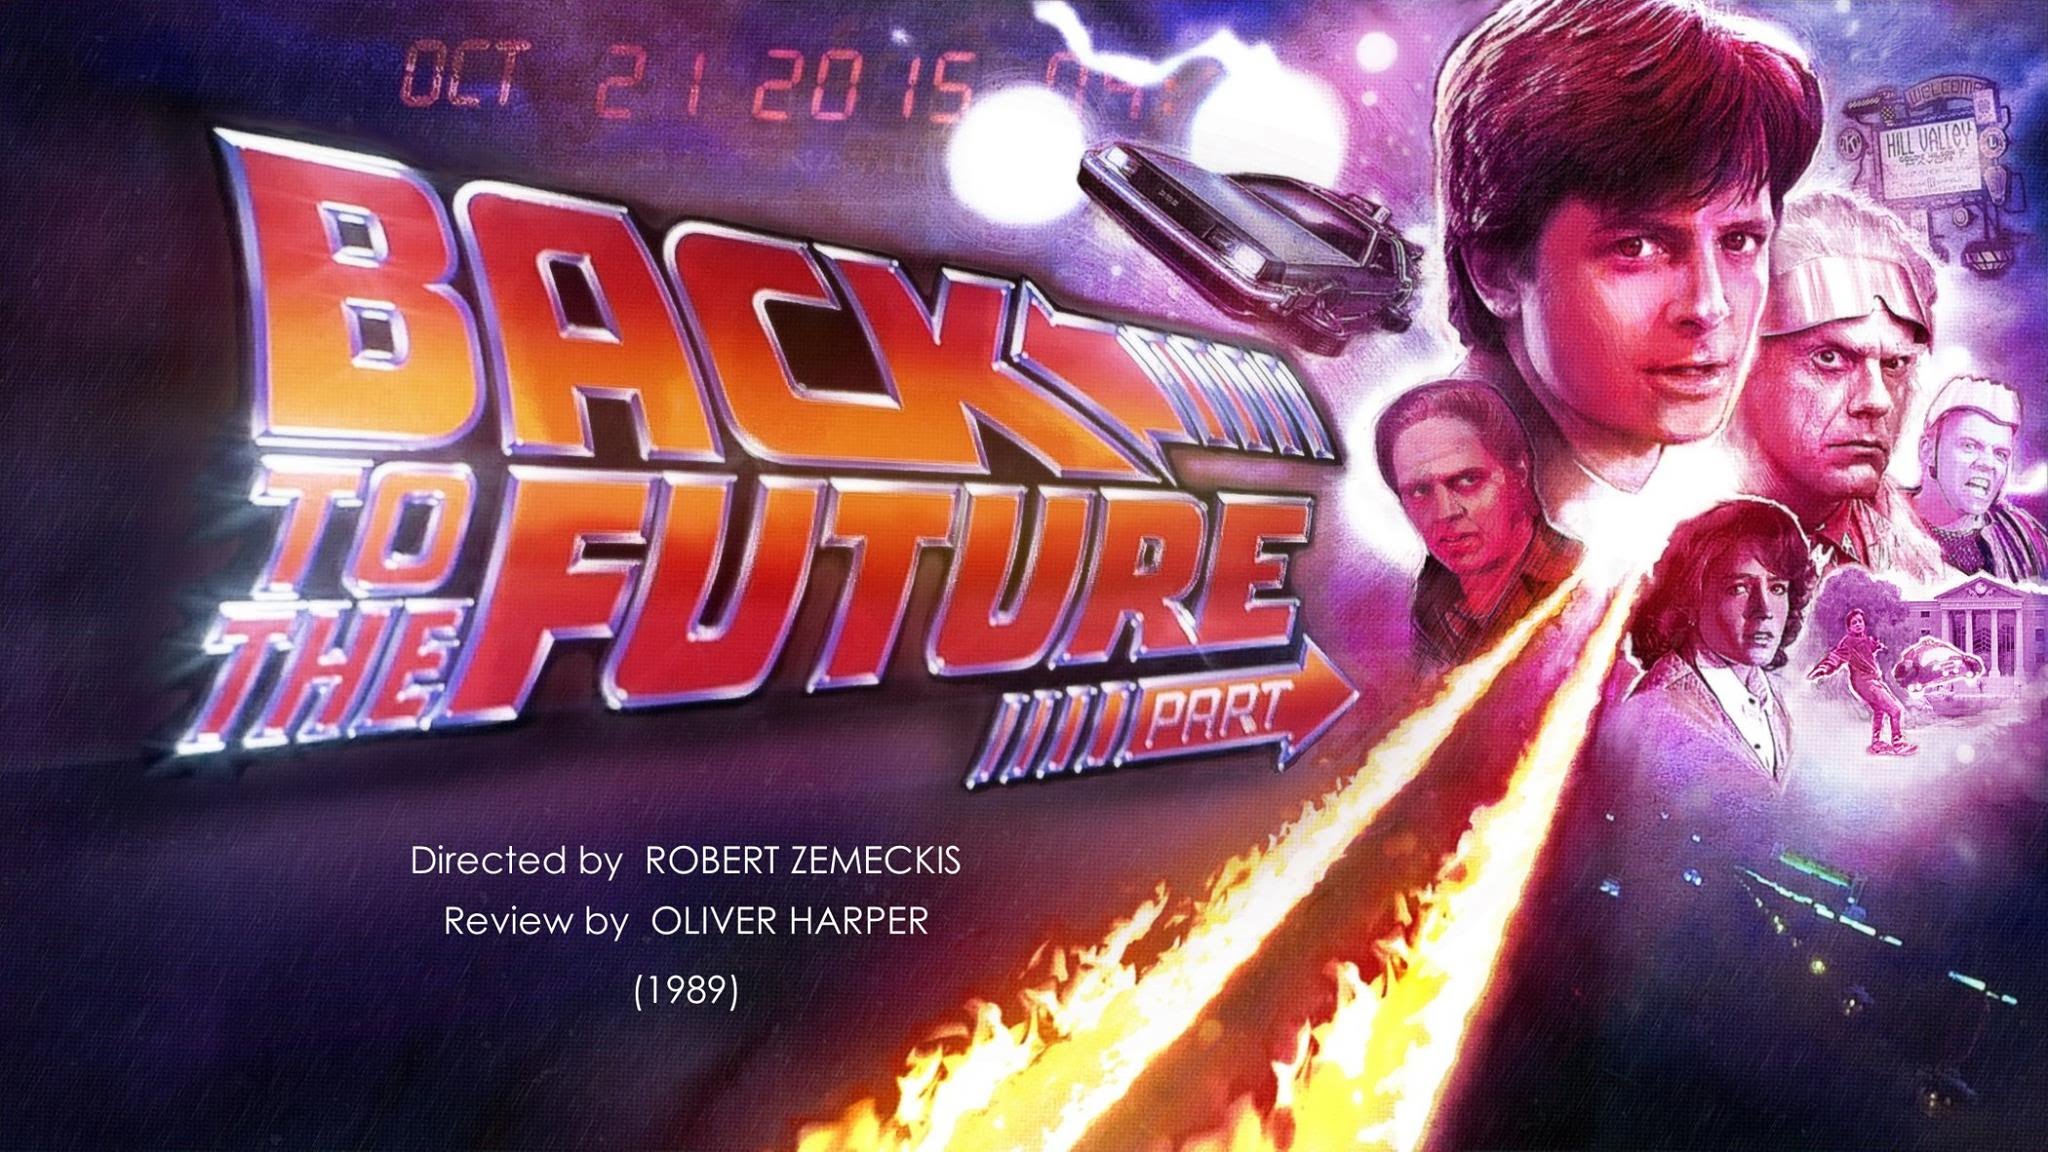 Back To The Future Part II wallpaper, Movie, HQ Back To The Future Part II pictureK Wallpaper 2019